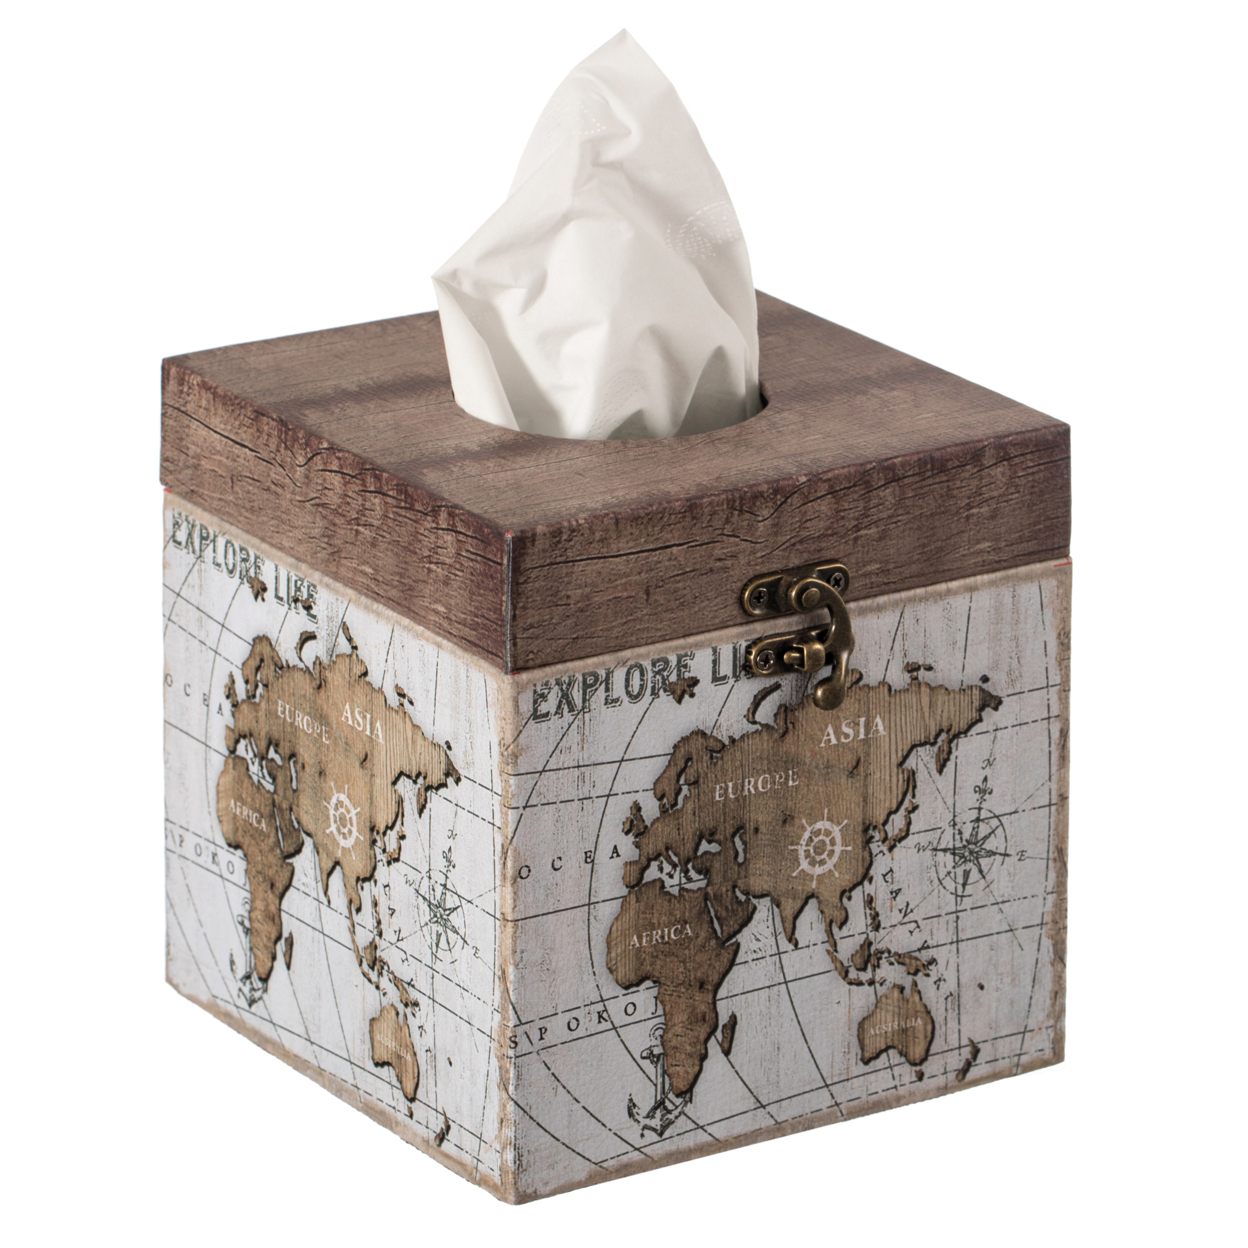 Facial Tissue Box Holder For Your Bathroom, Office, Or Vanity With Decorative World Map Design - Square